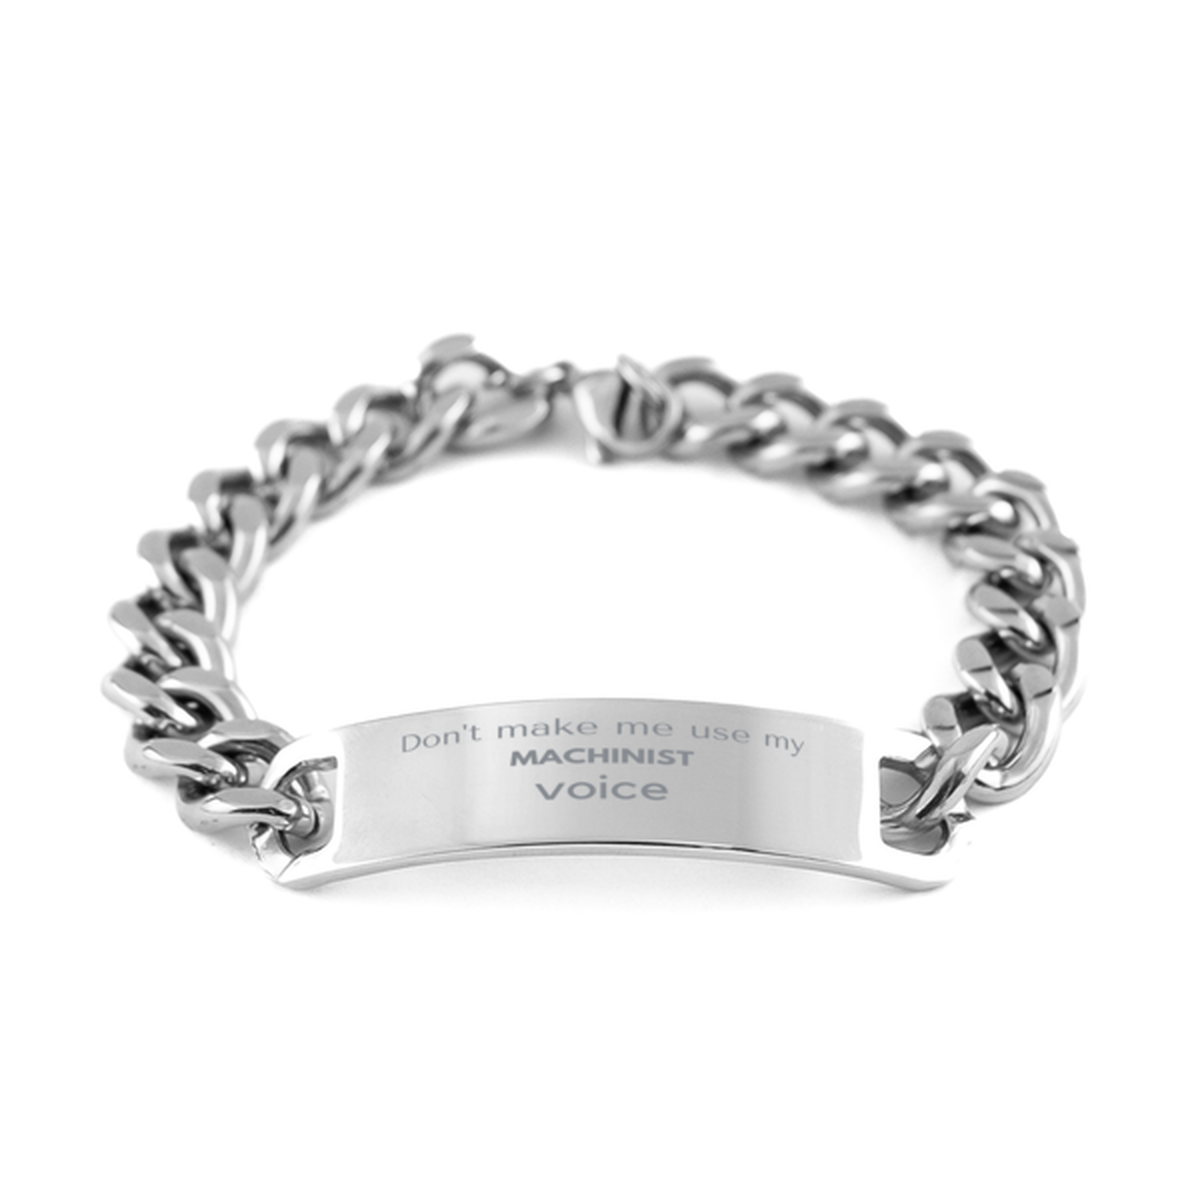 Don't make me use my Machinist voice, Sarcasm Machinist Gifts, Christmas Machinist Cuban Chain Stainless Steel Bracelet Birthday Unique Gifts For Machinist Coworkers, Men, Women, Colleague, Friends